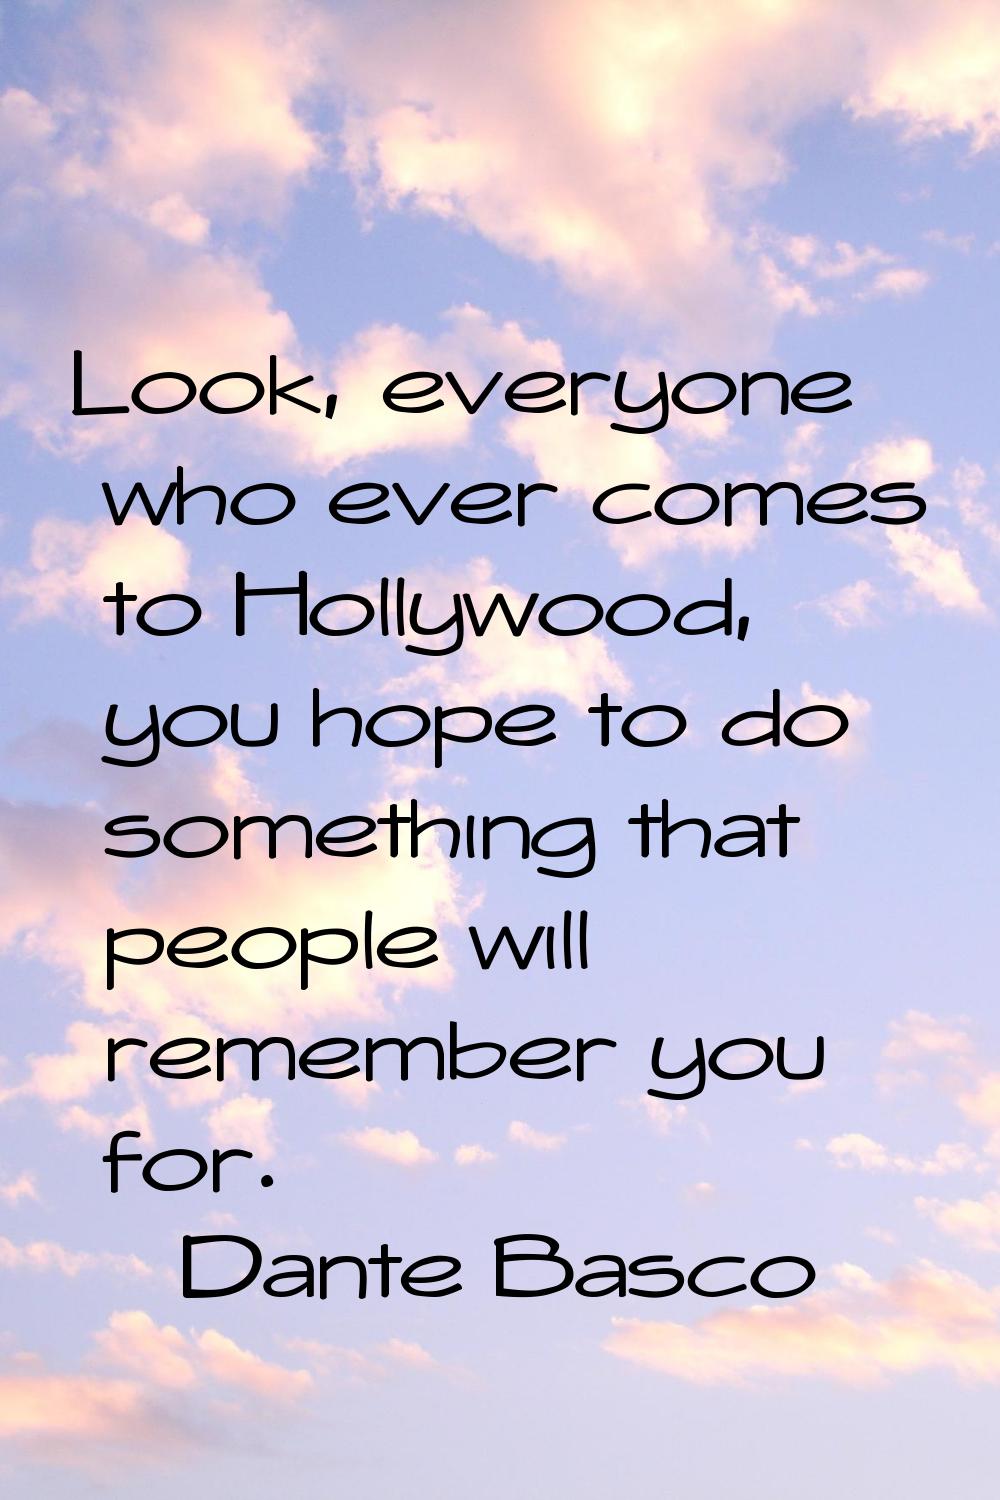 Look, everyone who ever comes to Hollywood, you hope to do something that people will remember you 